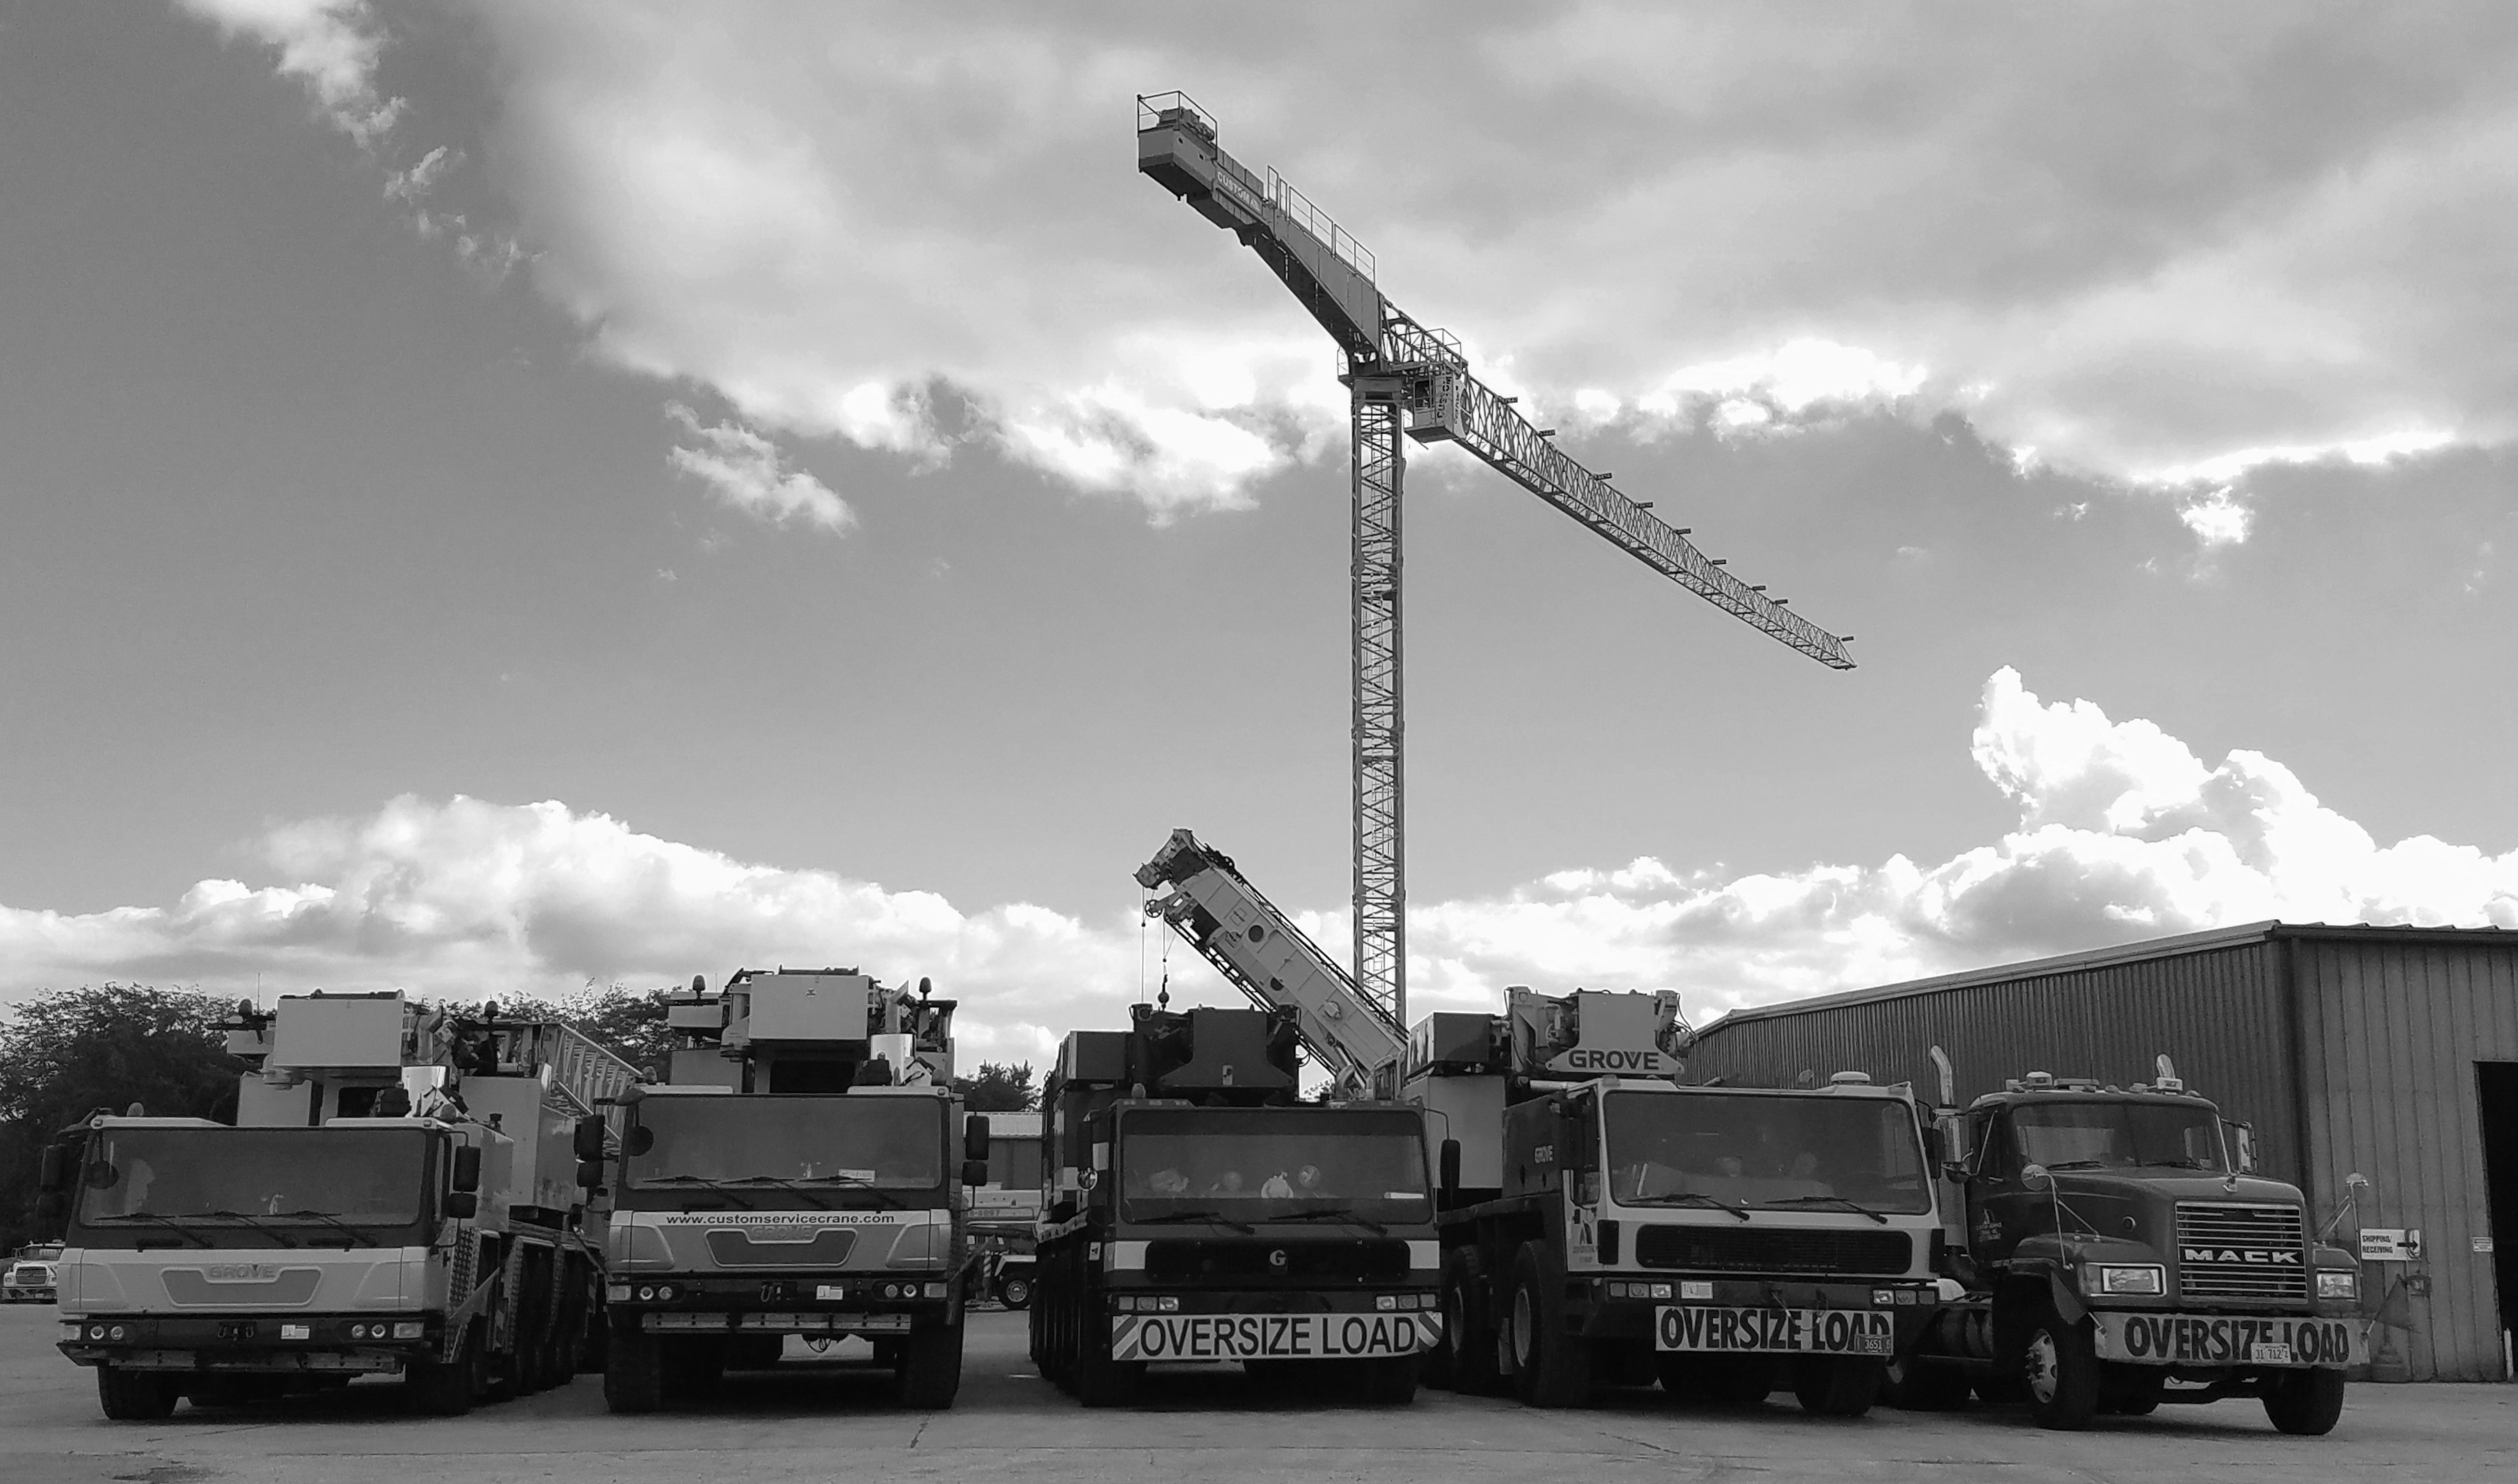 Some of Custom Service Crane's larger equipment lined up in the Fisher, IL yard. Equipment left to right: 275 ton, 275 ton, 175 ton, tower crane (background,, 175 ton, & lowboy